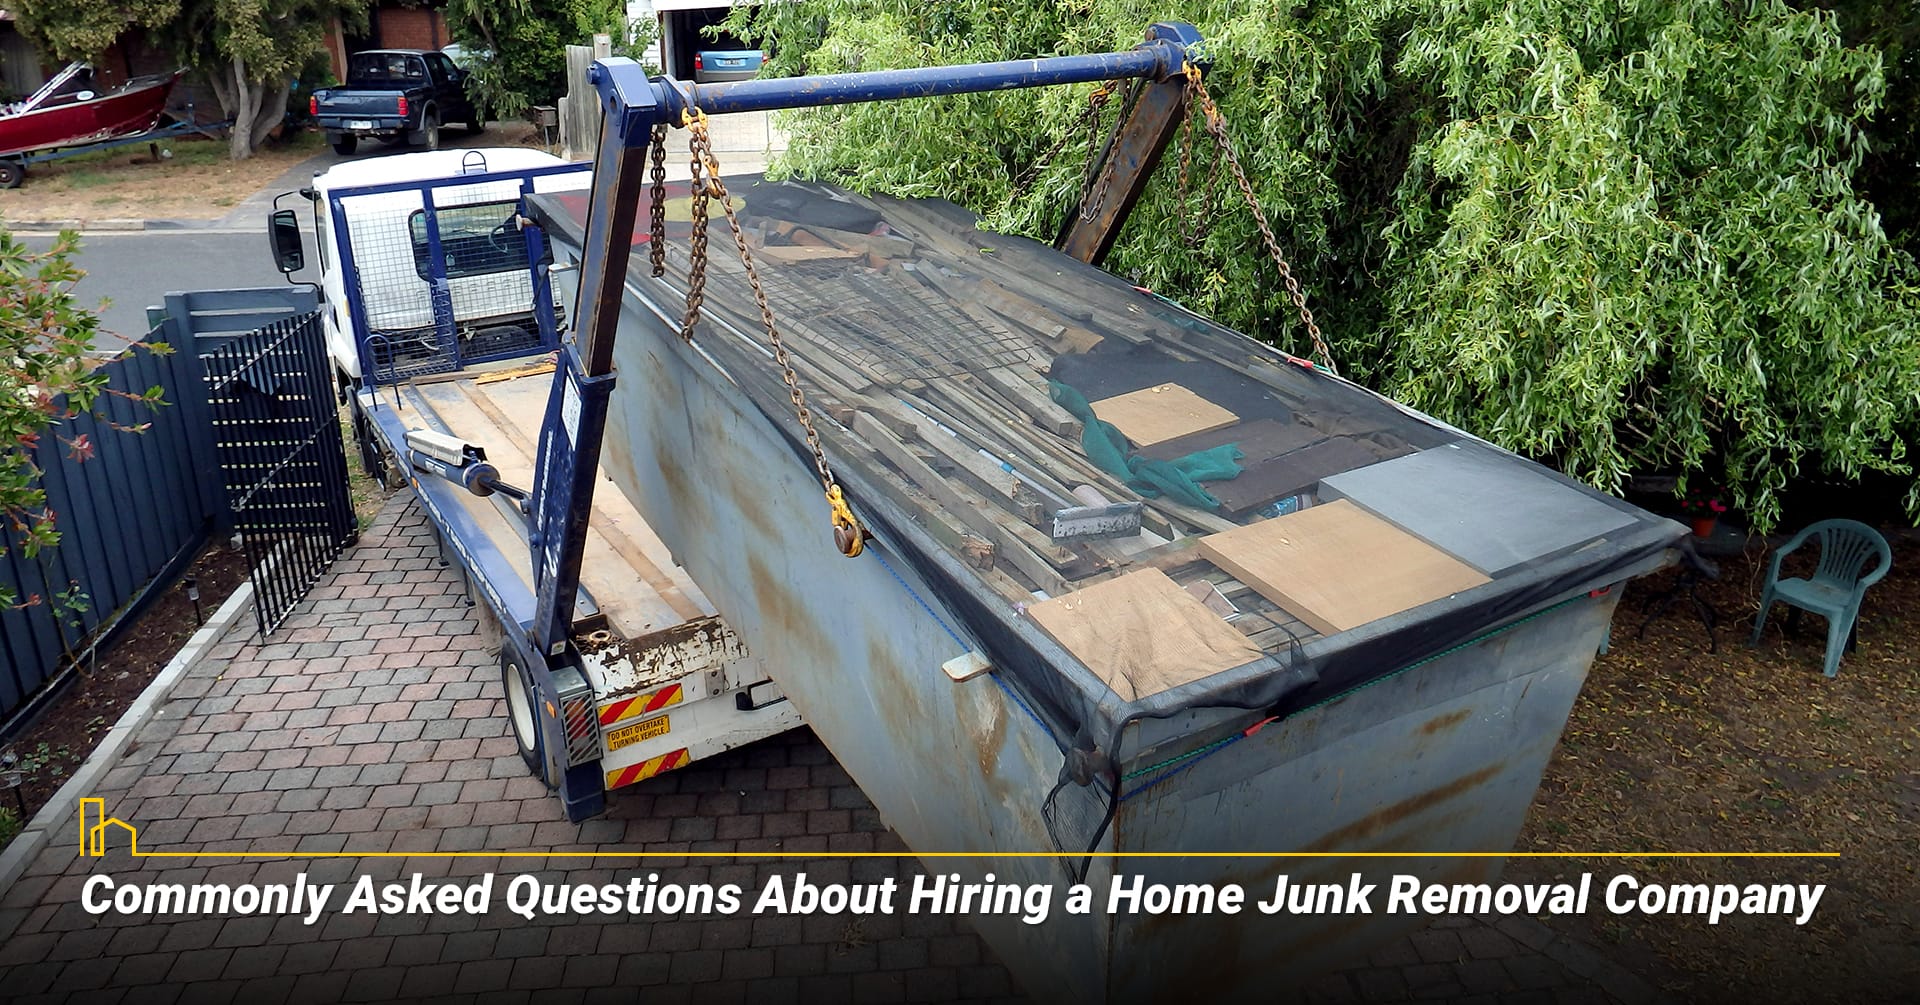 COMMONLY ASKED QUESTIONS ABOUT HIRING A HOME JUNK REMOVAL COMPANY